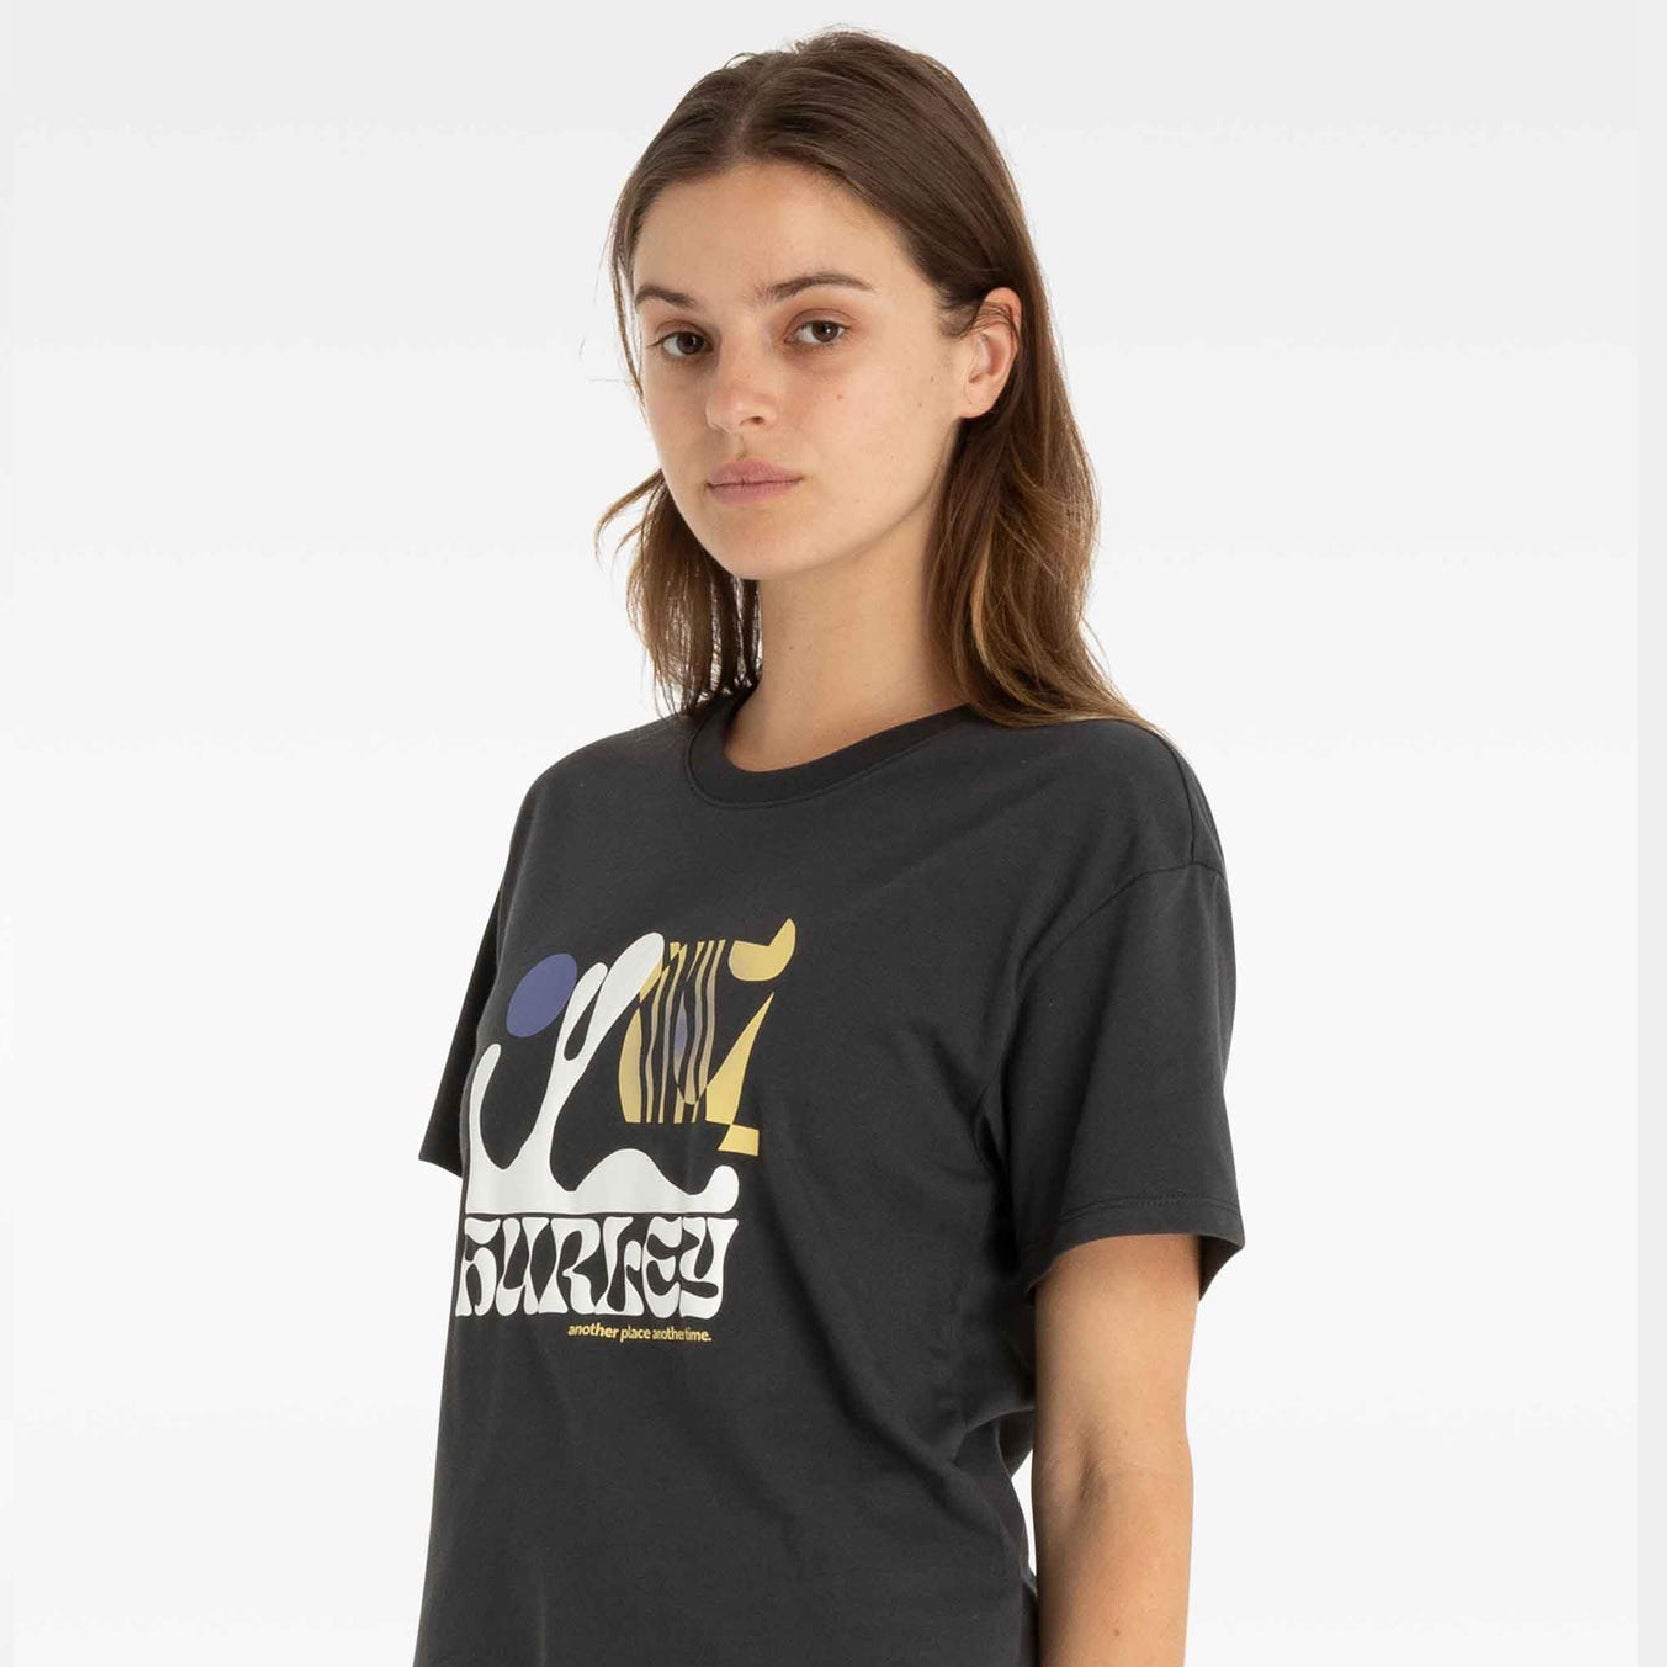 ANOTHER TIME WOMEN'S T-SHIRT